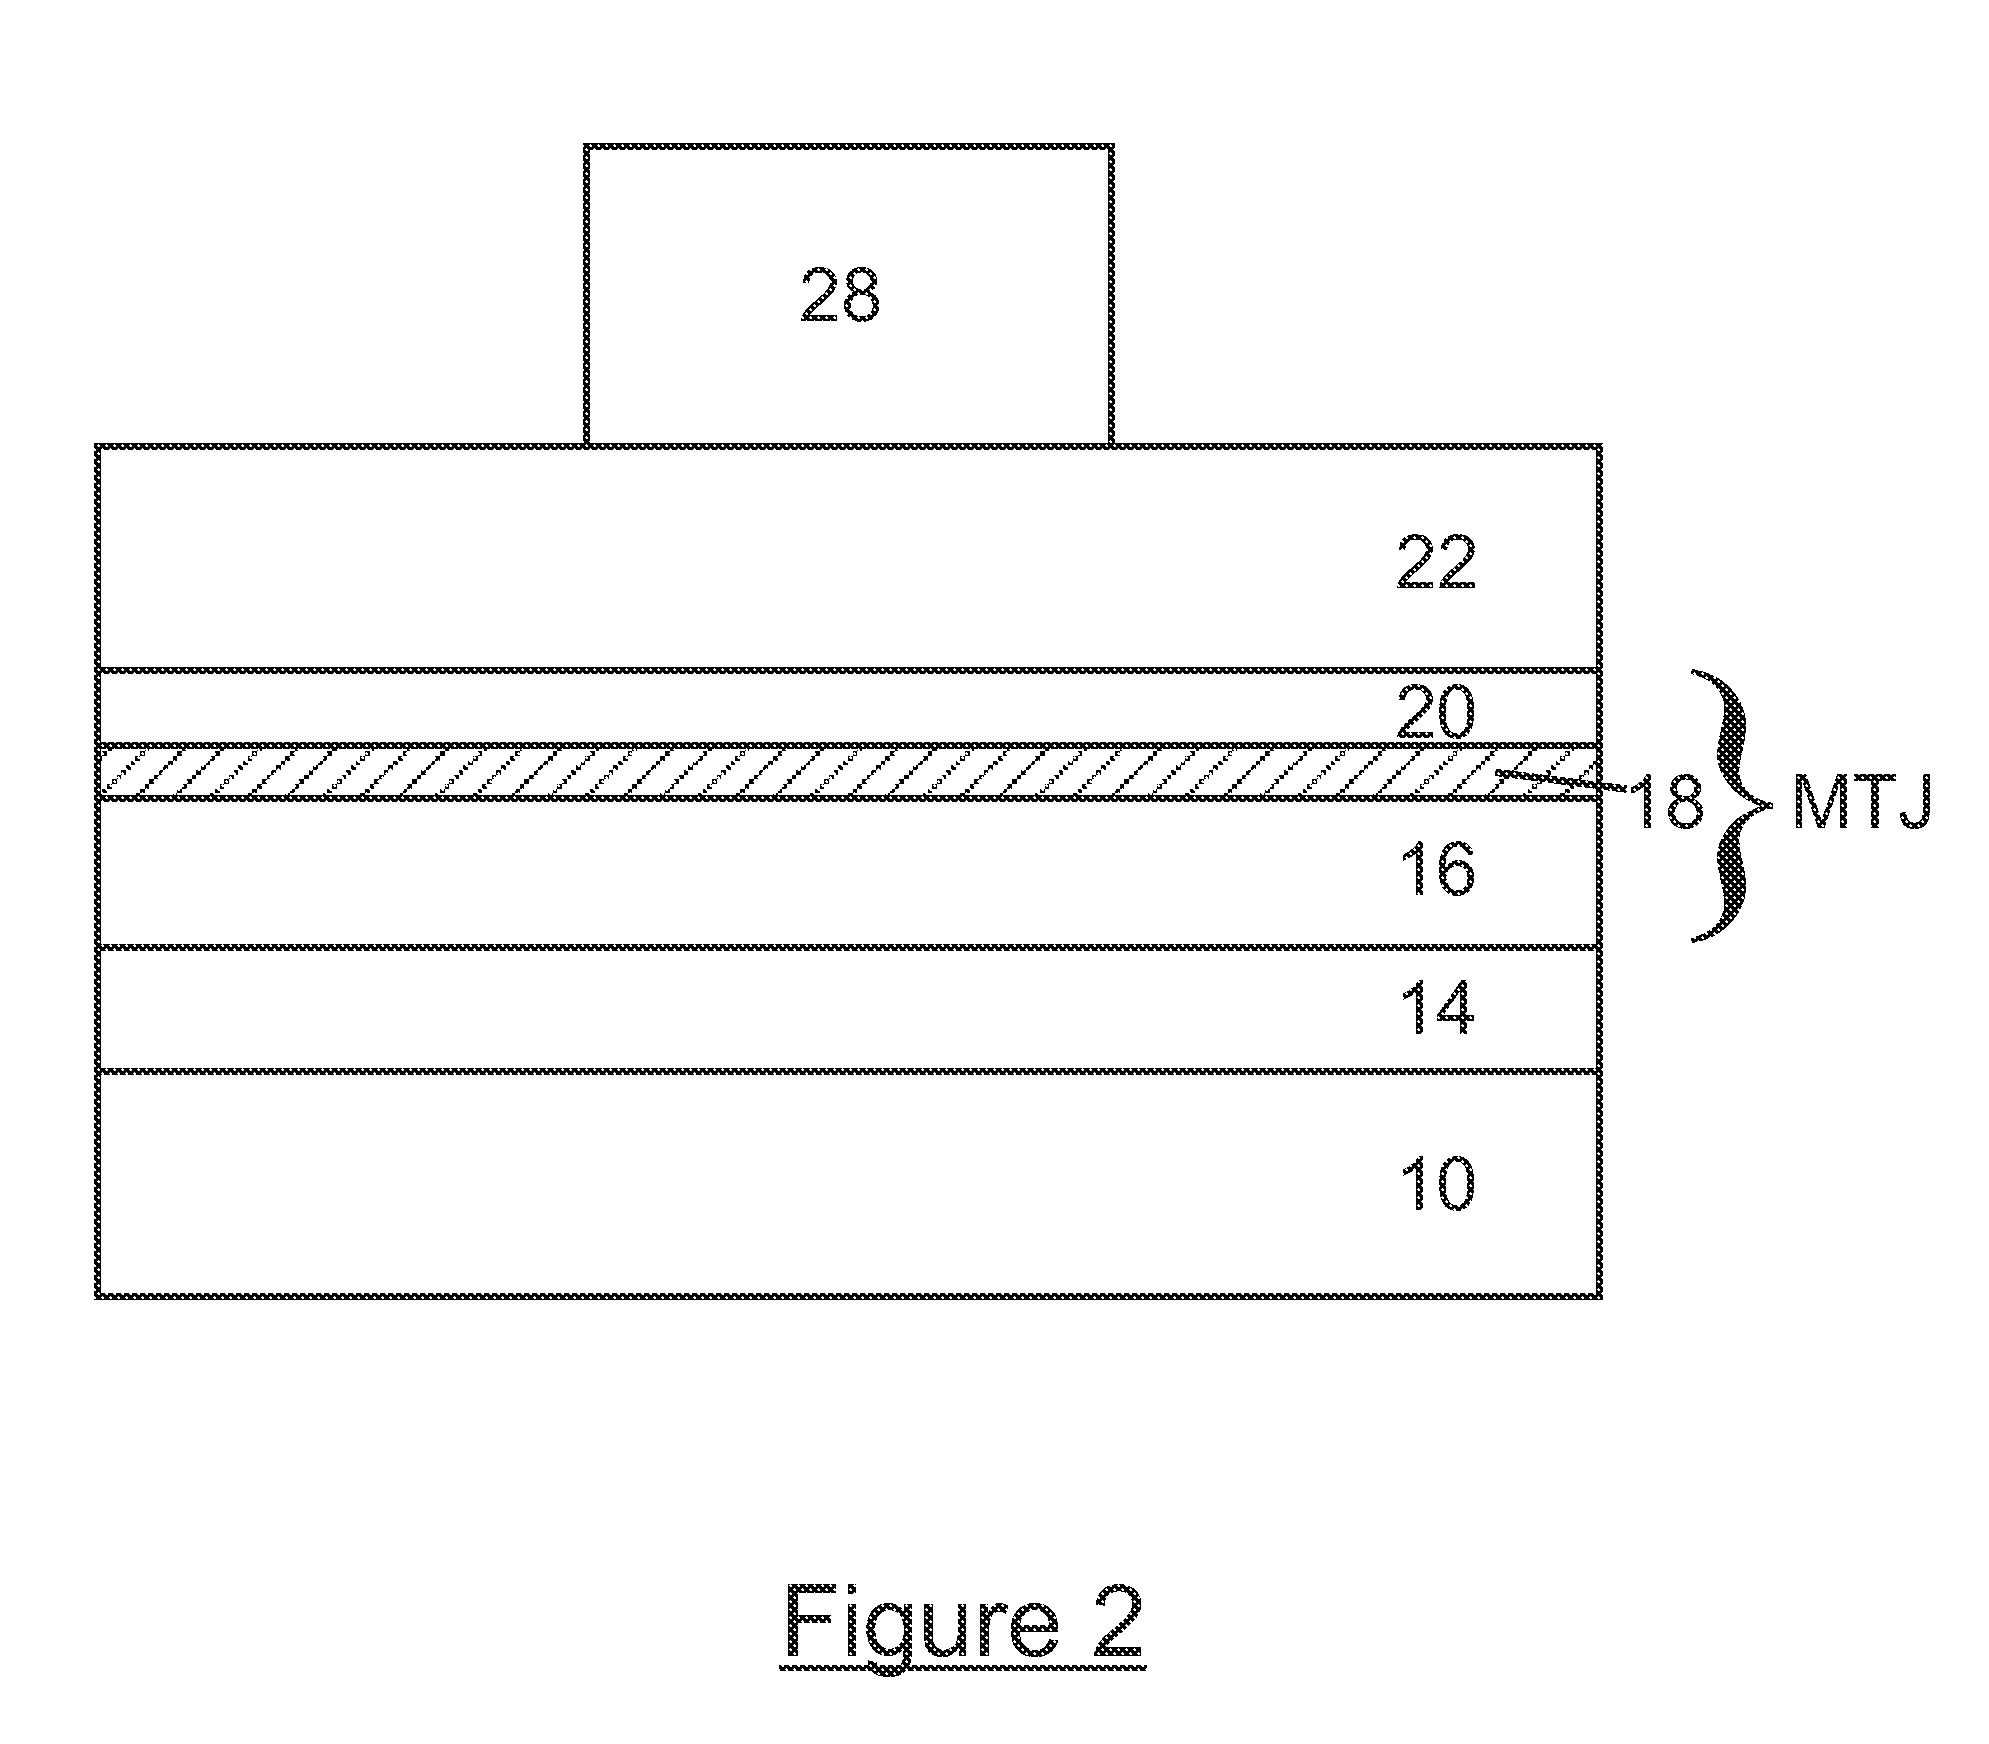 Dry etch stop process for eliminating electrical shorting in MRAM device structures